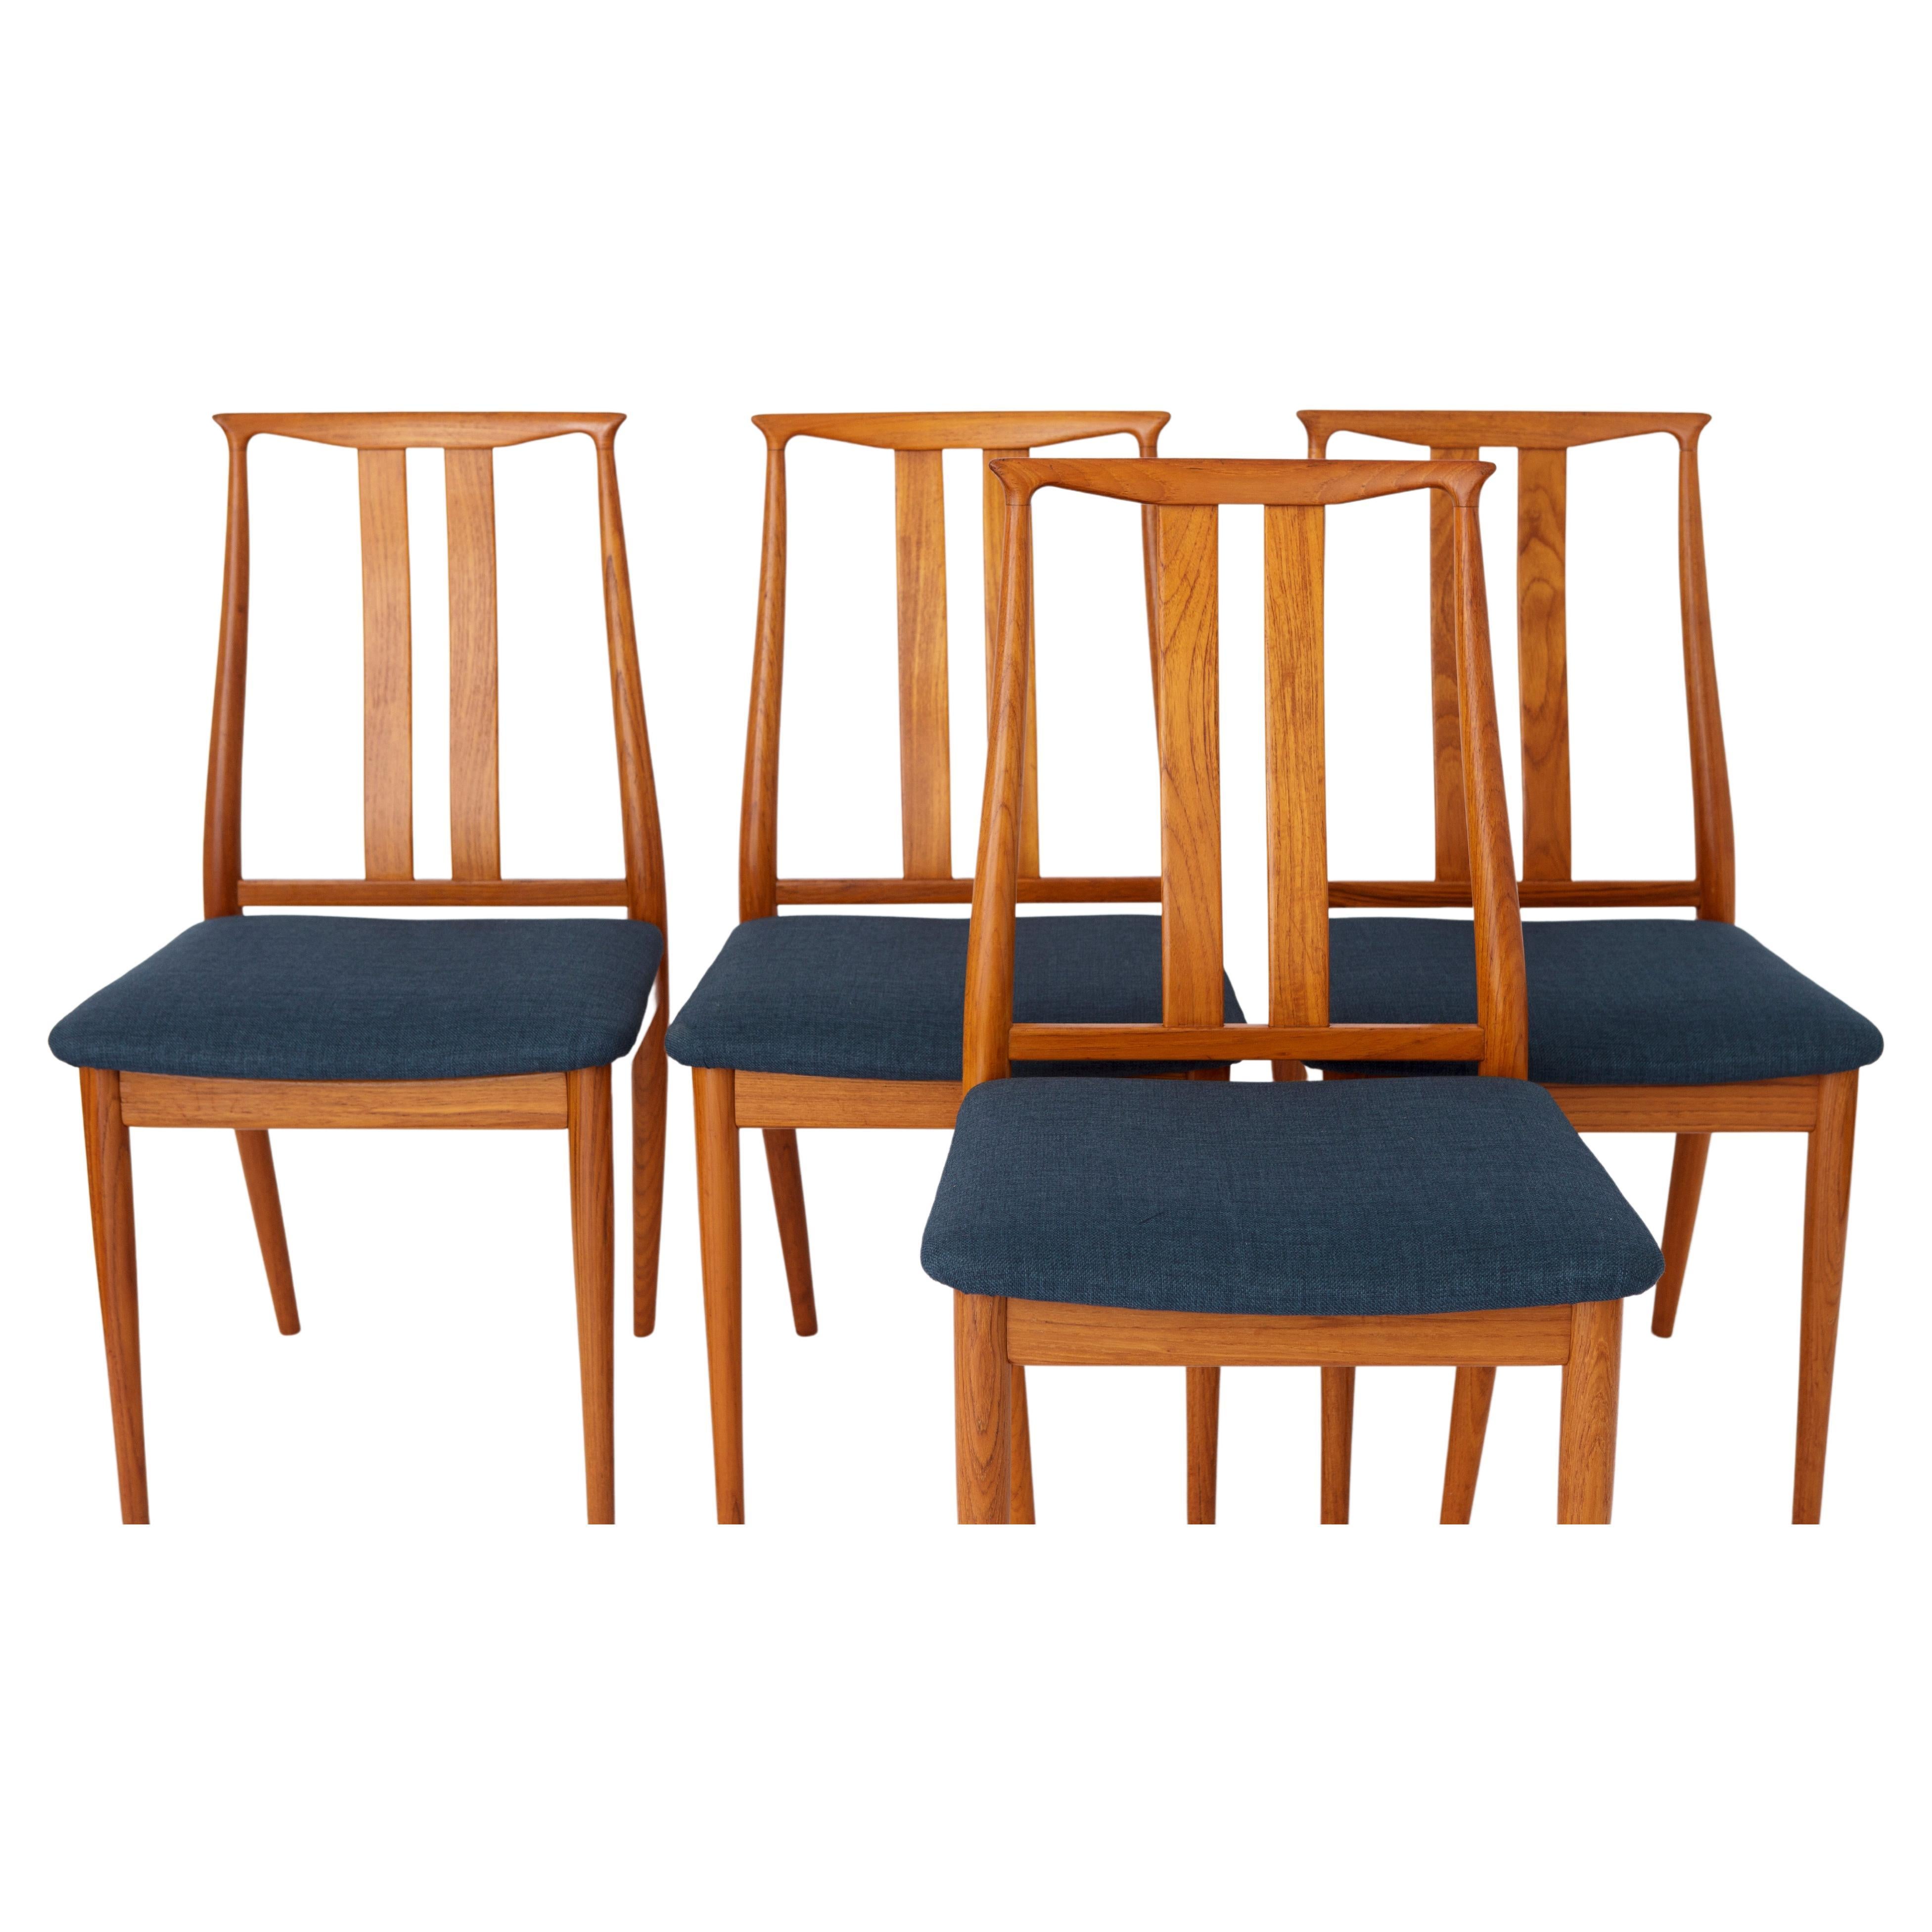 4 Vintage Dining Chairs, 1960s, Danish, Teak For Sale